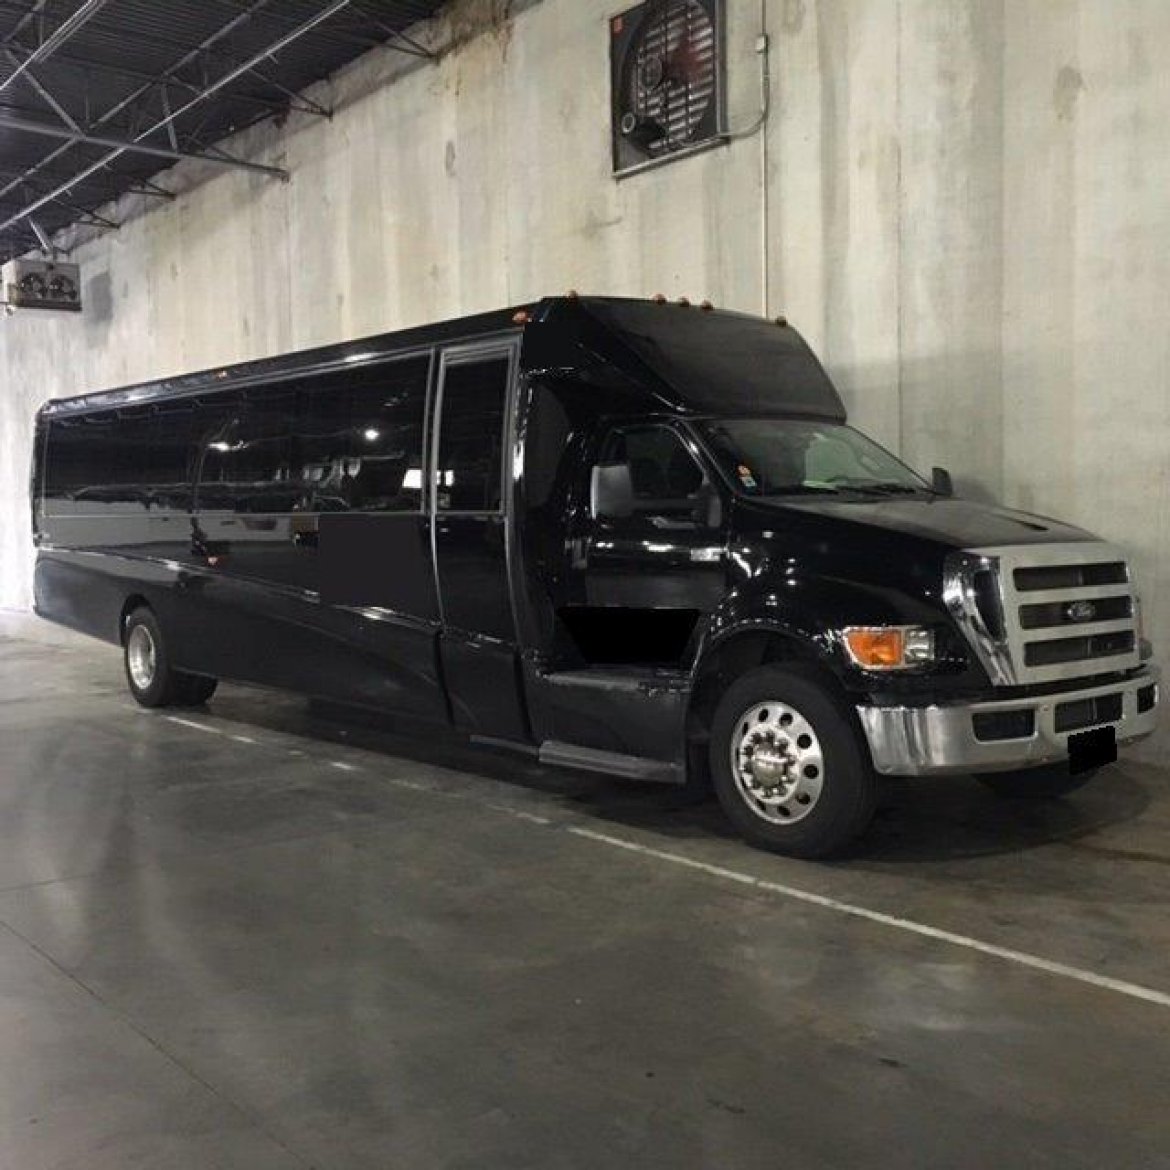 Executive Shuttle for sale: 2013 Ford F-650 by Grech